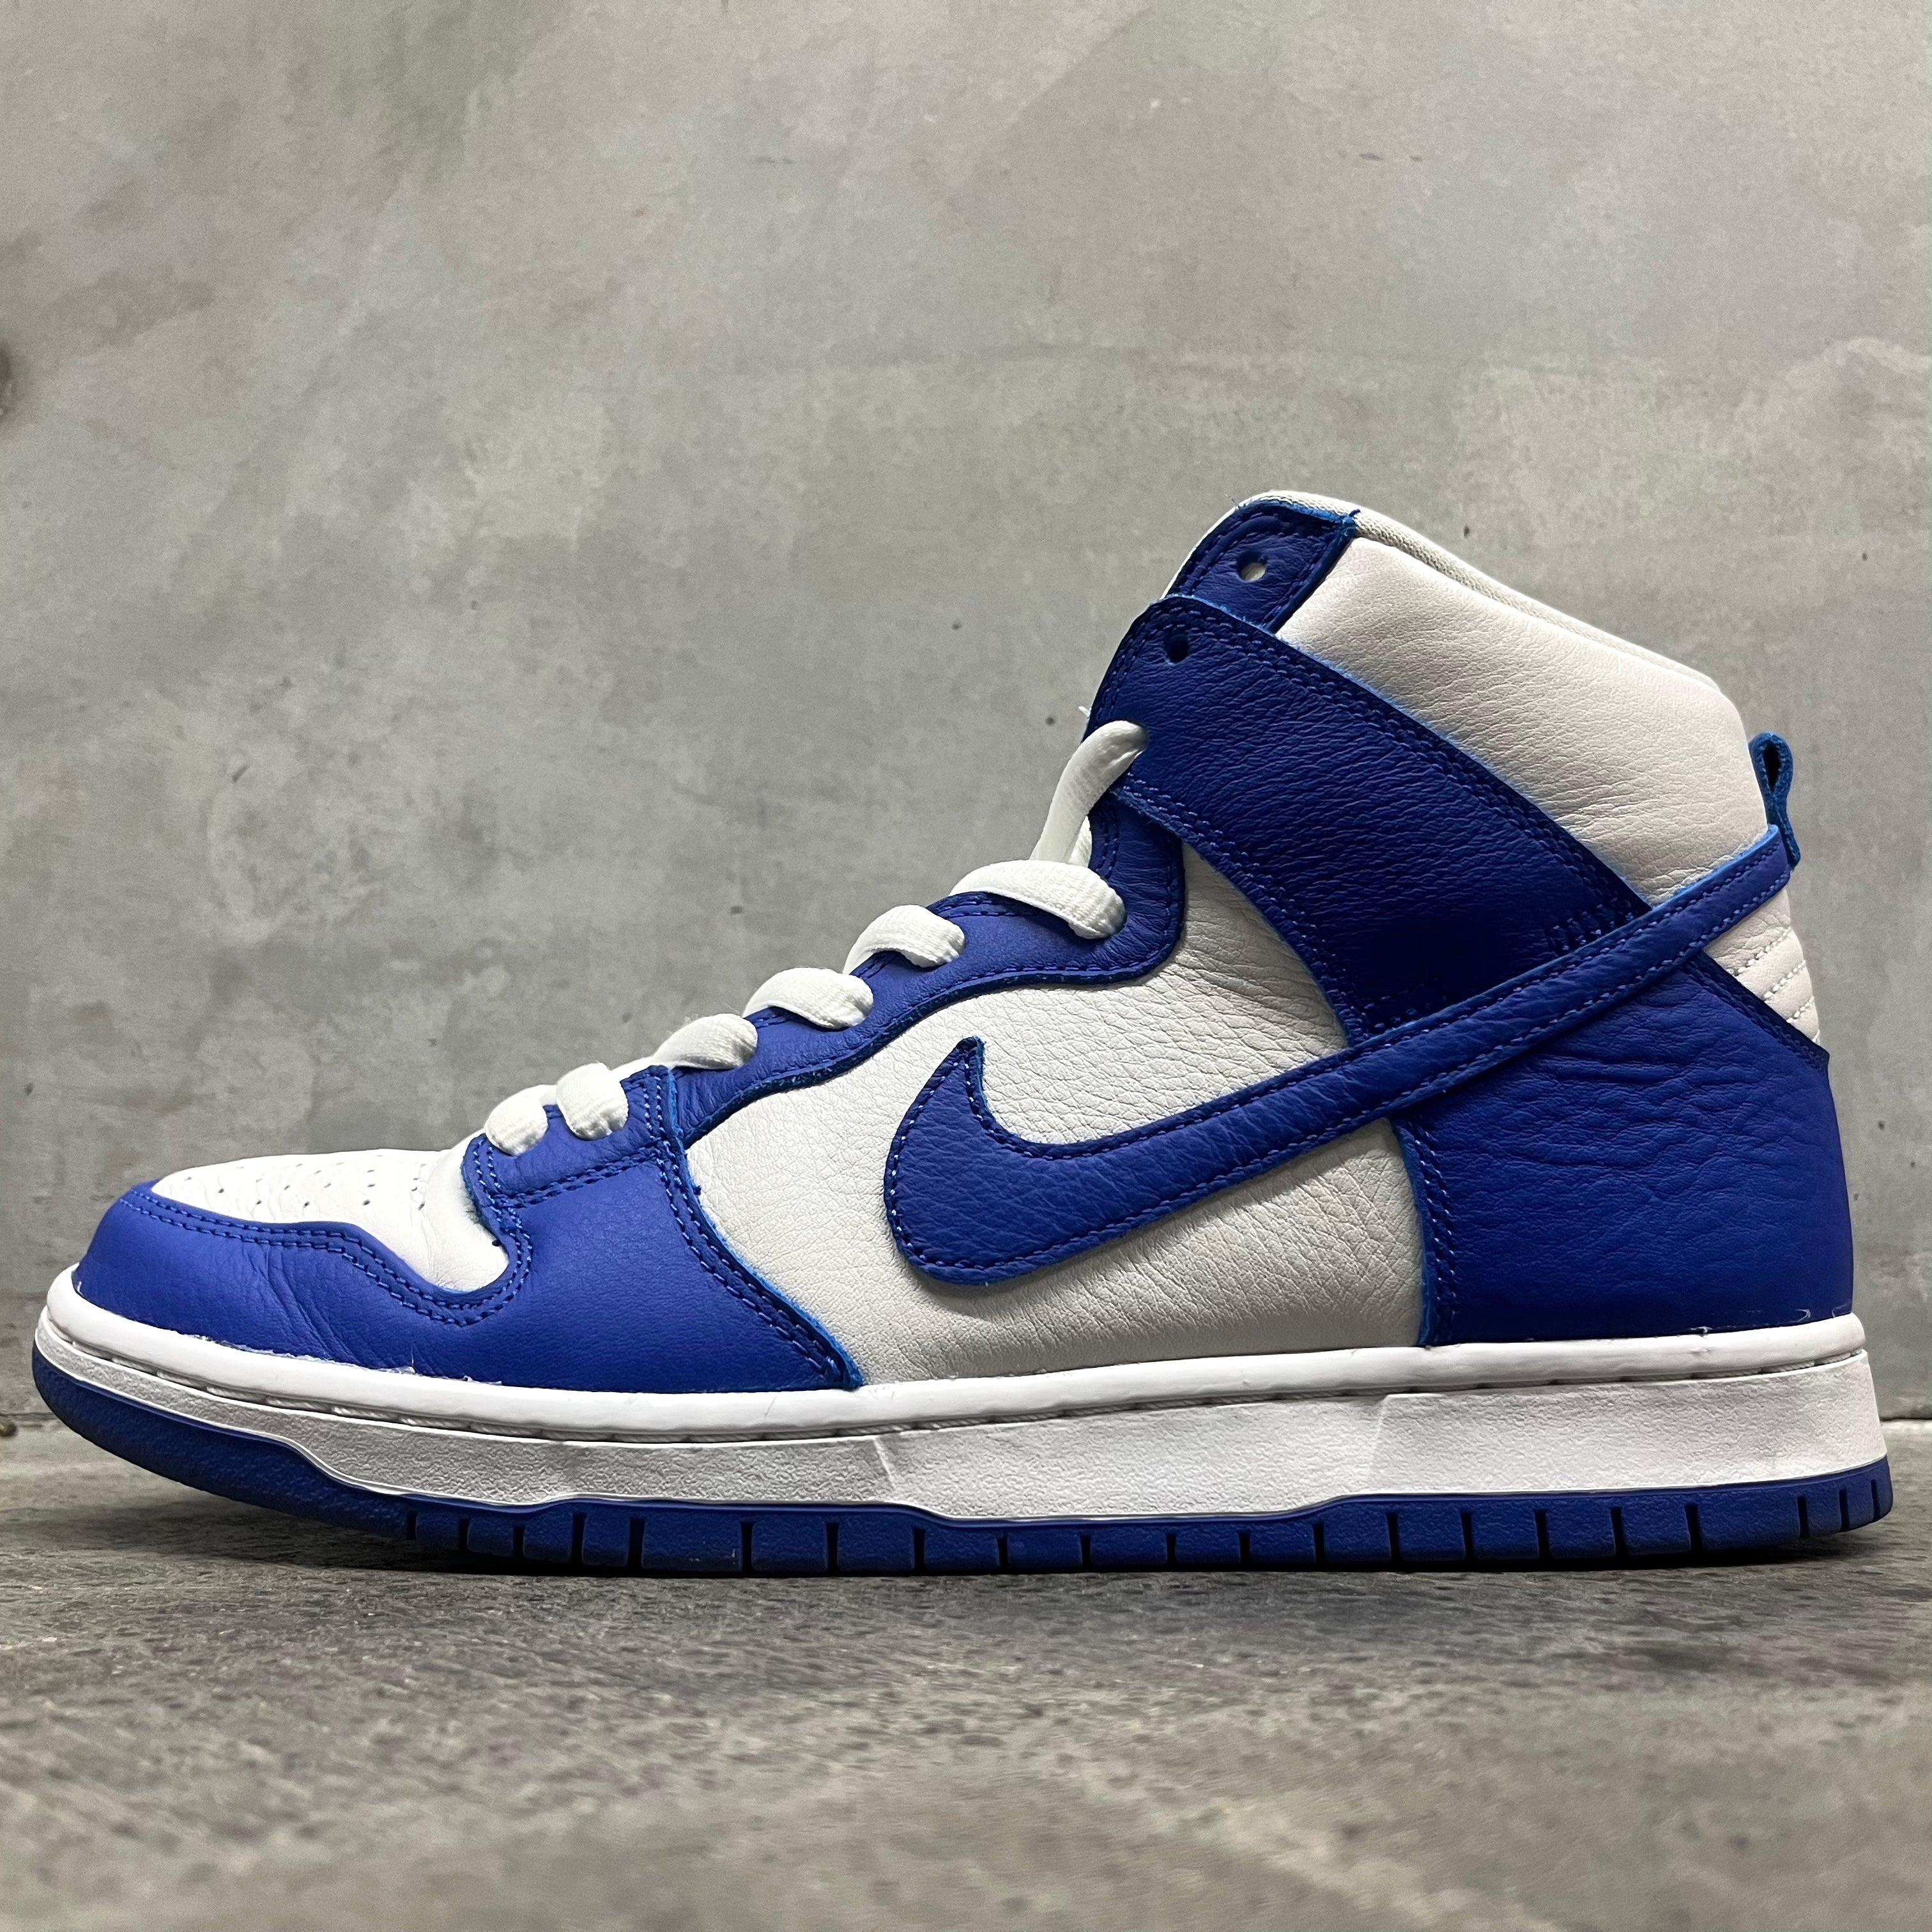 US9.5】NIKE SB DUNK HIGH PRO ISO DH7149-400